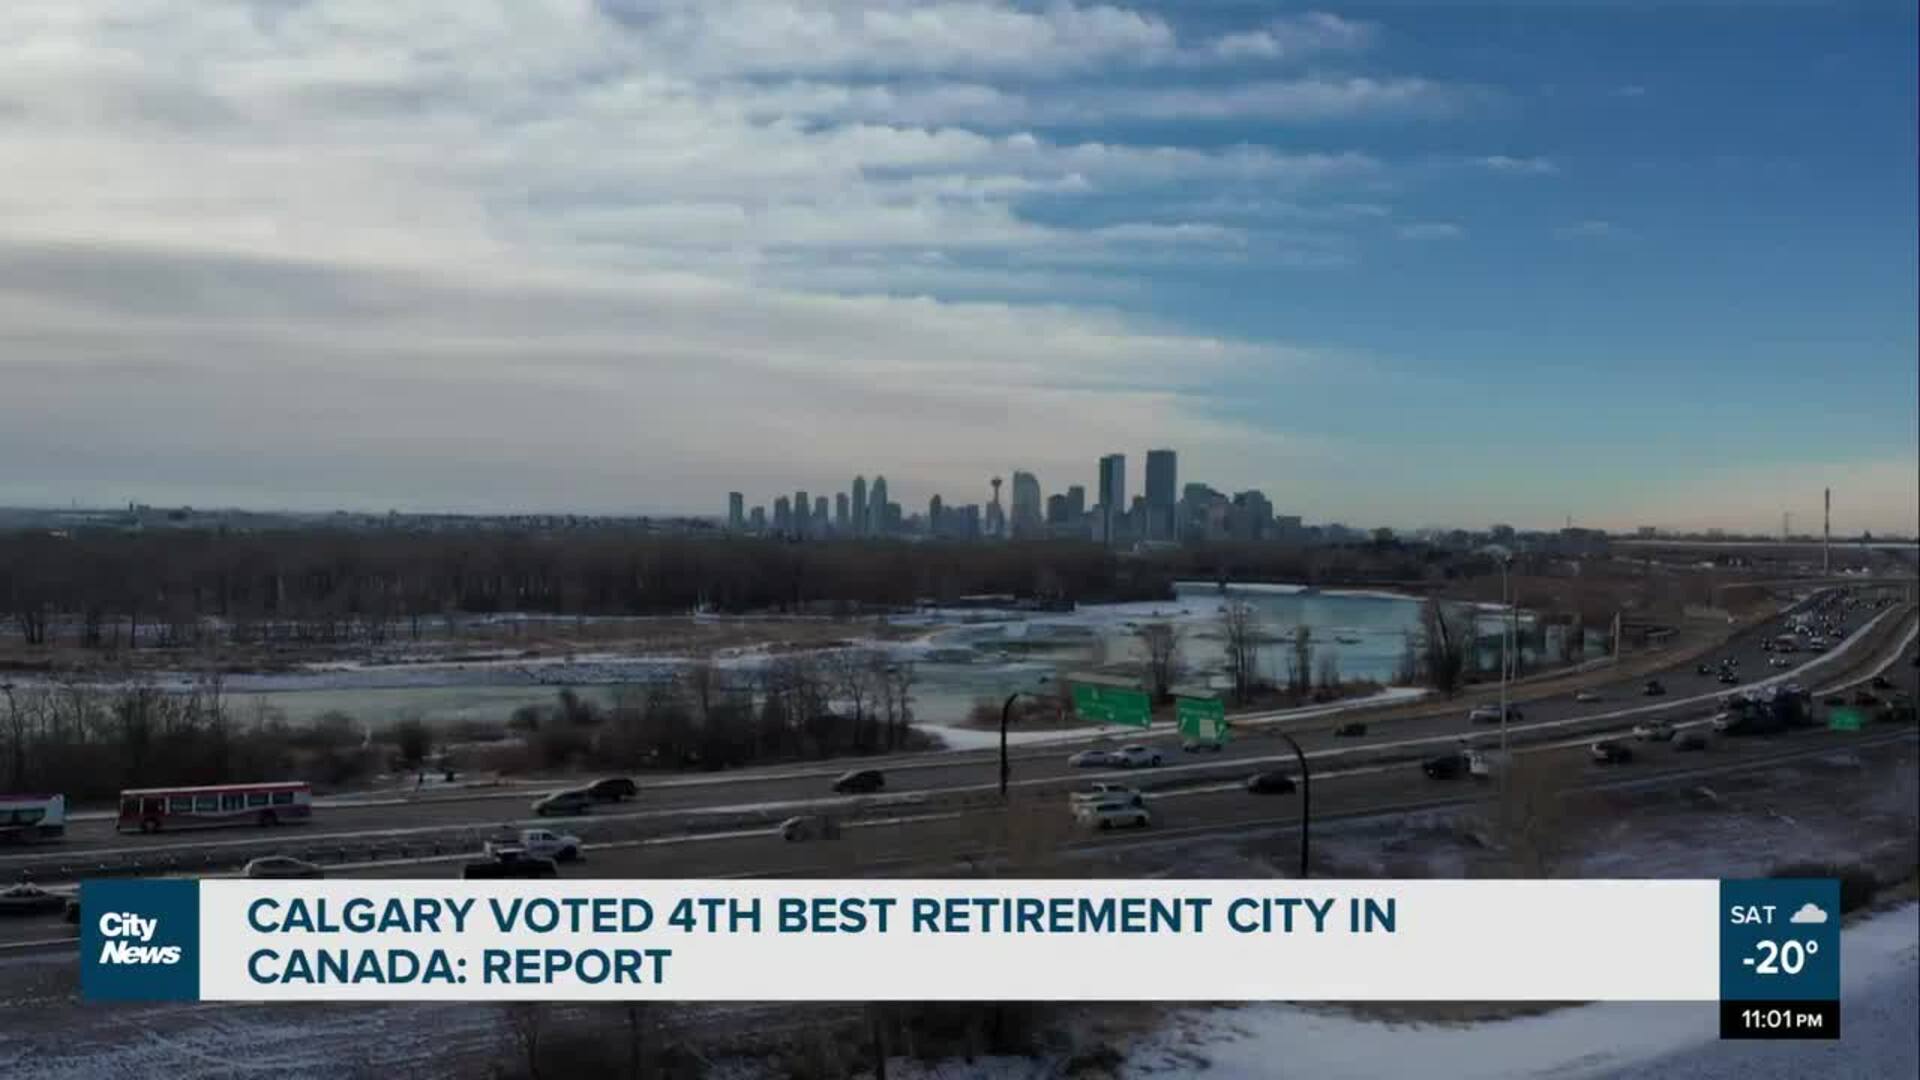 Calgary voted 4th best retirement city in Canada: report